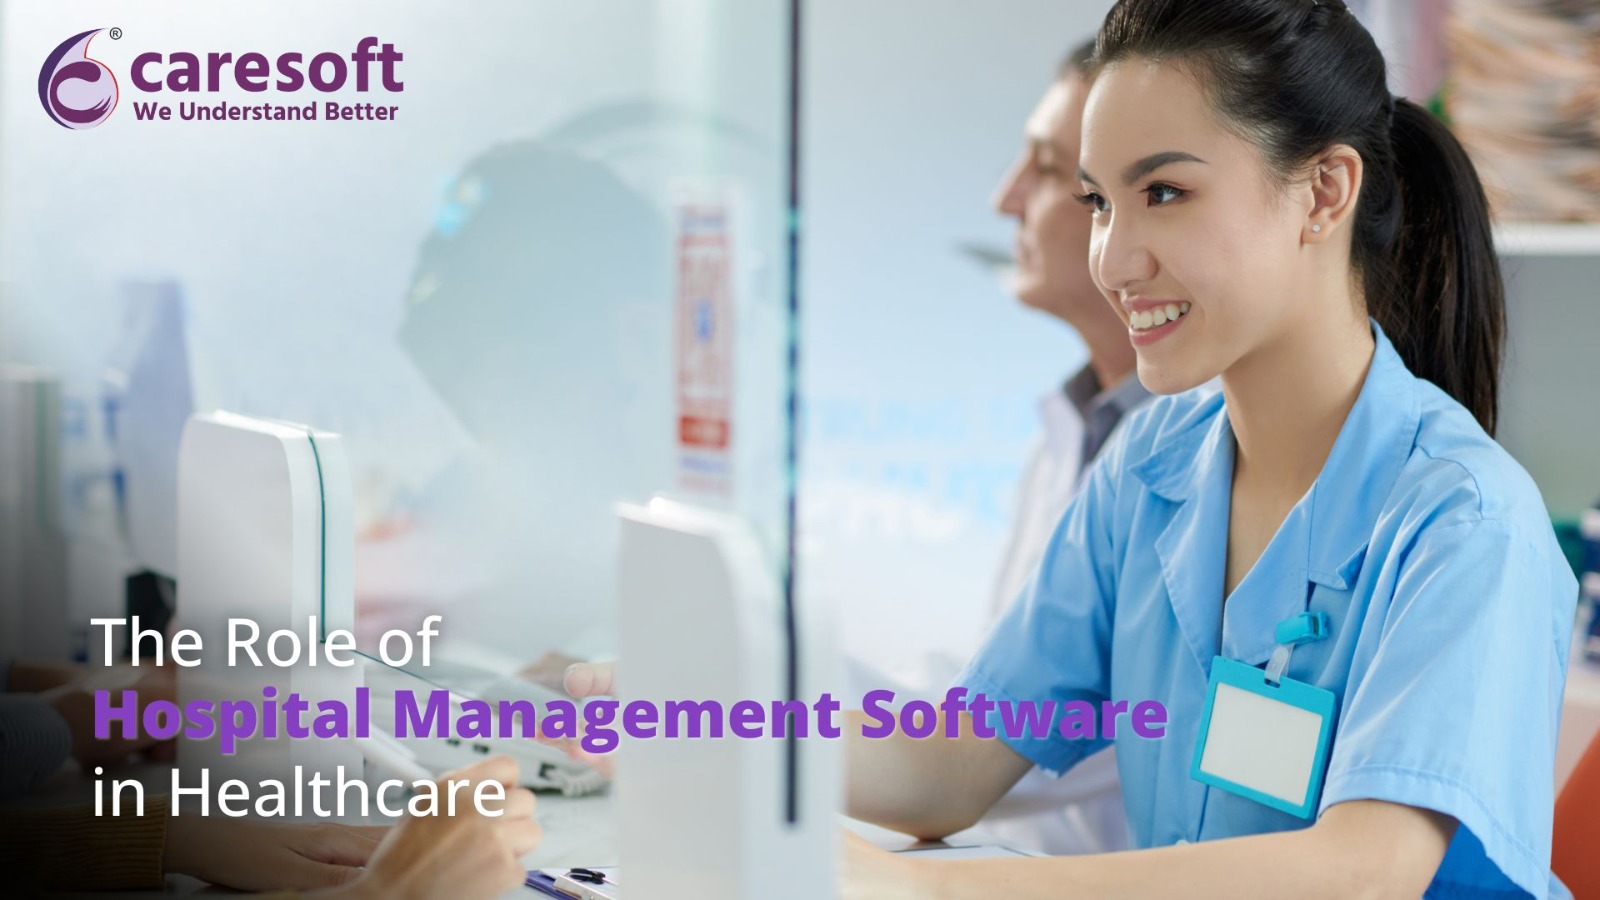 The role of hospital management software in Healthcare